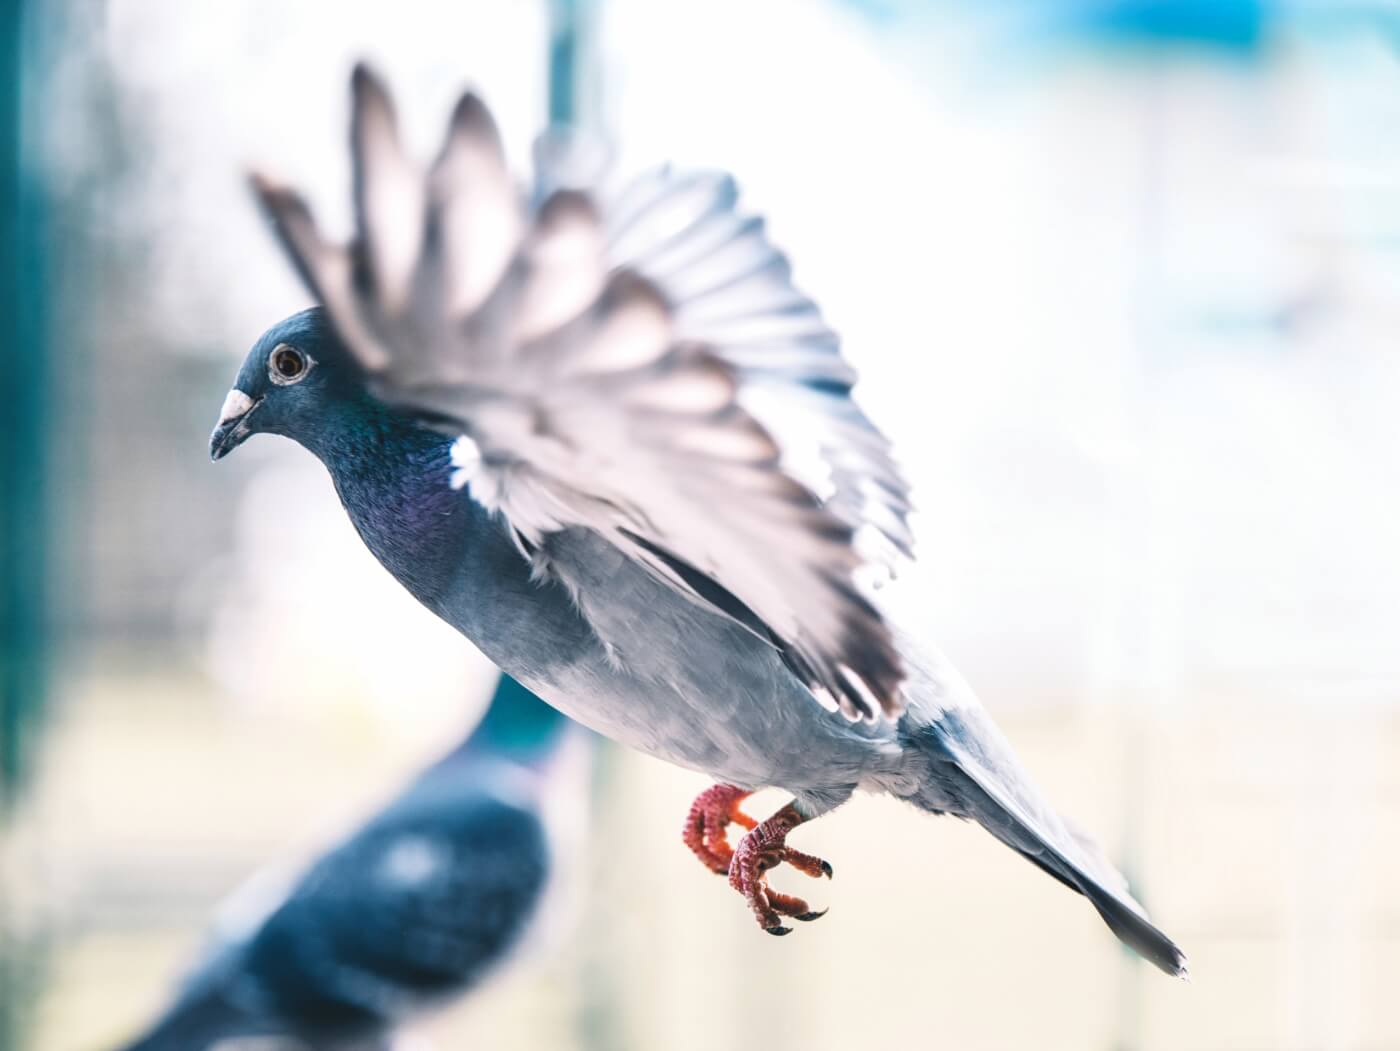 A pigeon flying